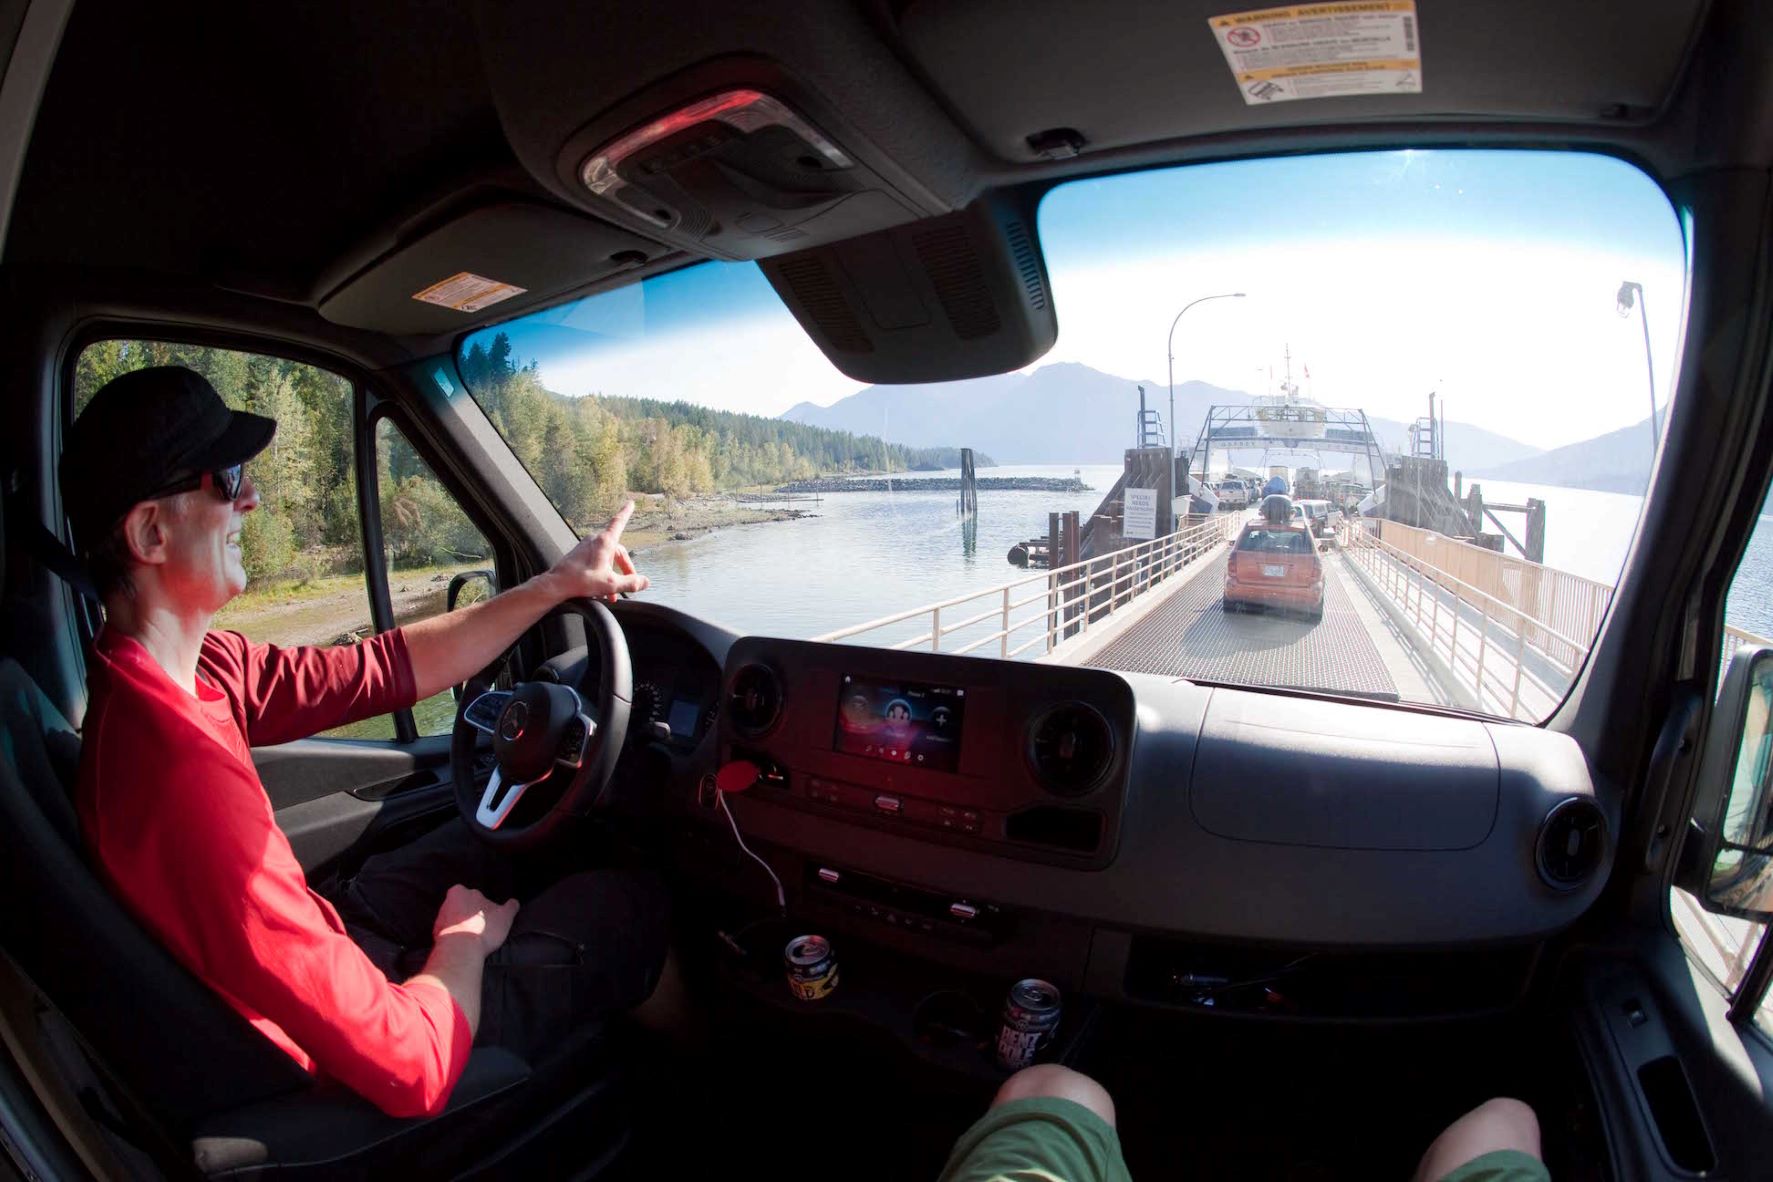 Man in the driver's seat of Sprinter van driving onto the loading dock of the Kootenay Lake Ferry.